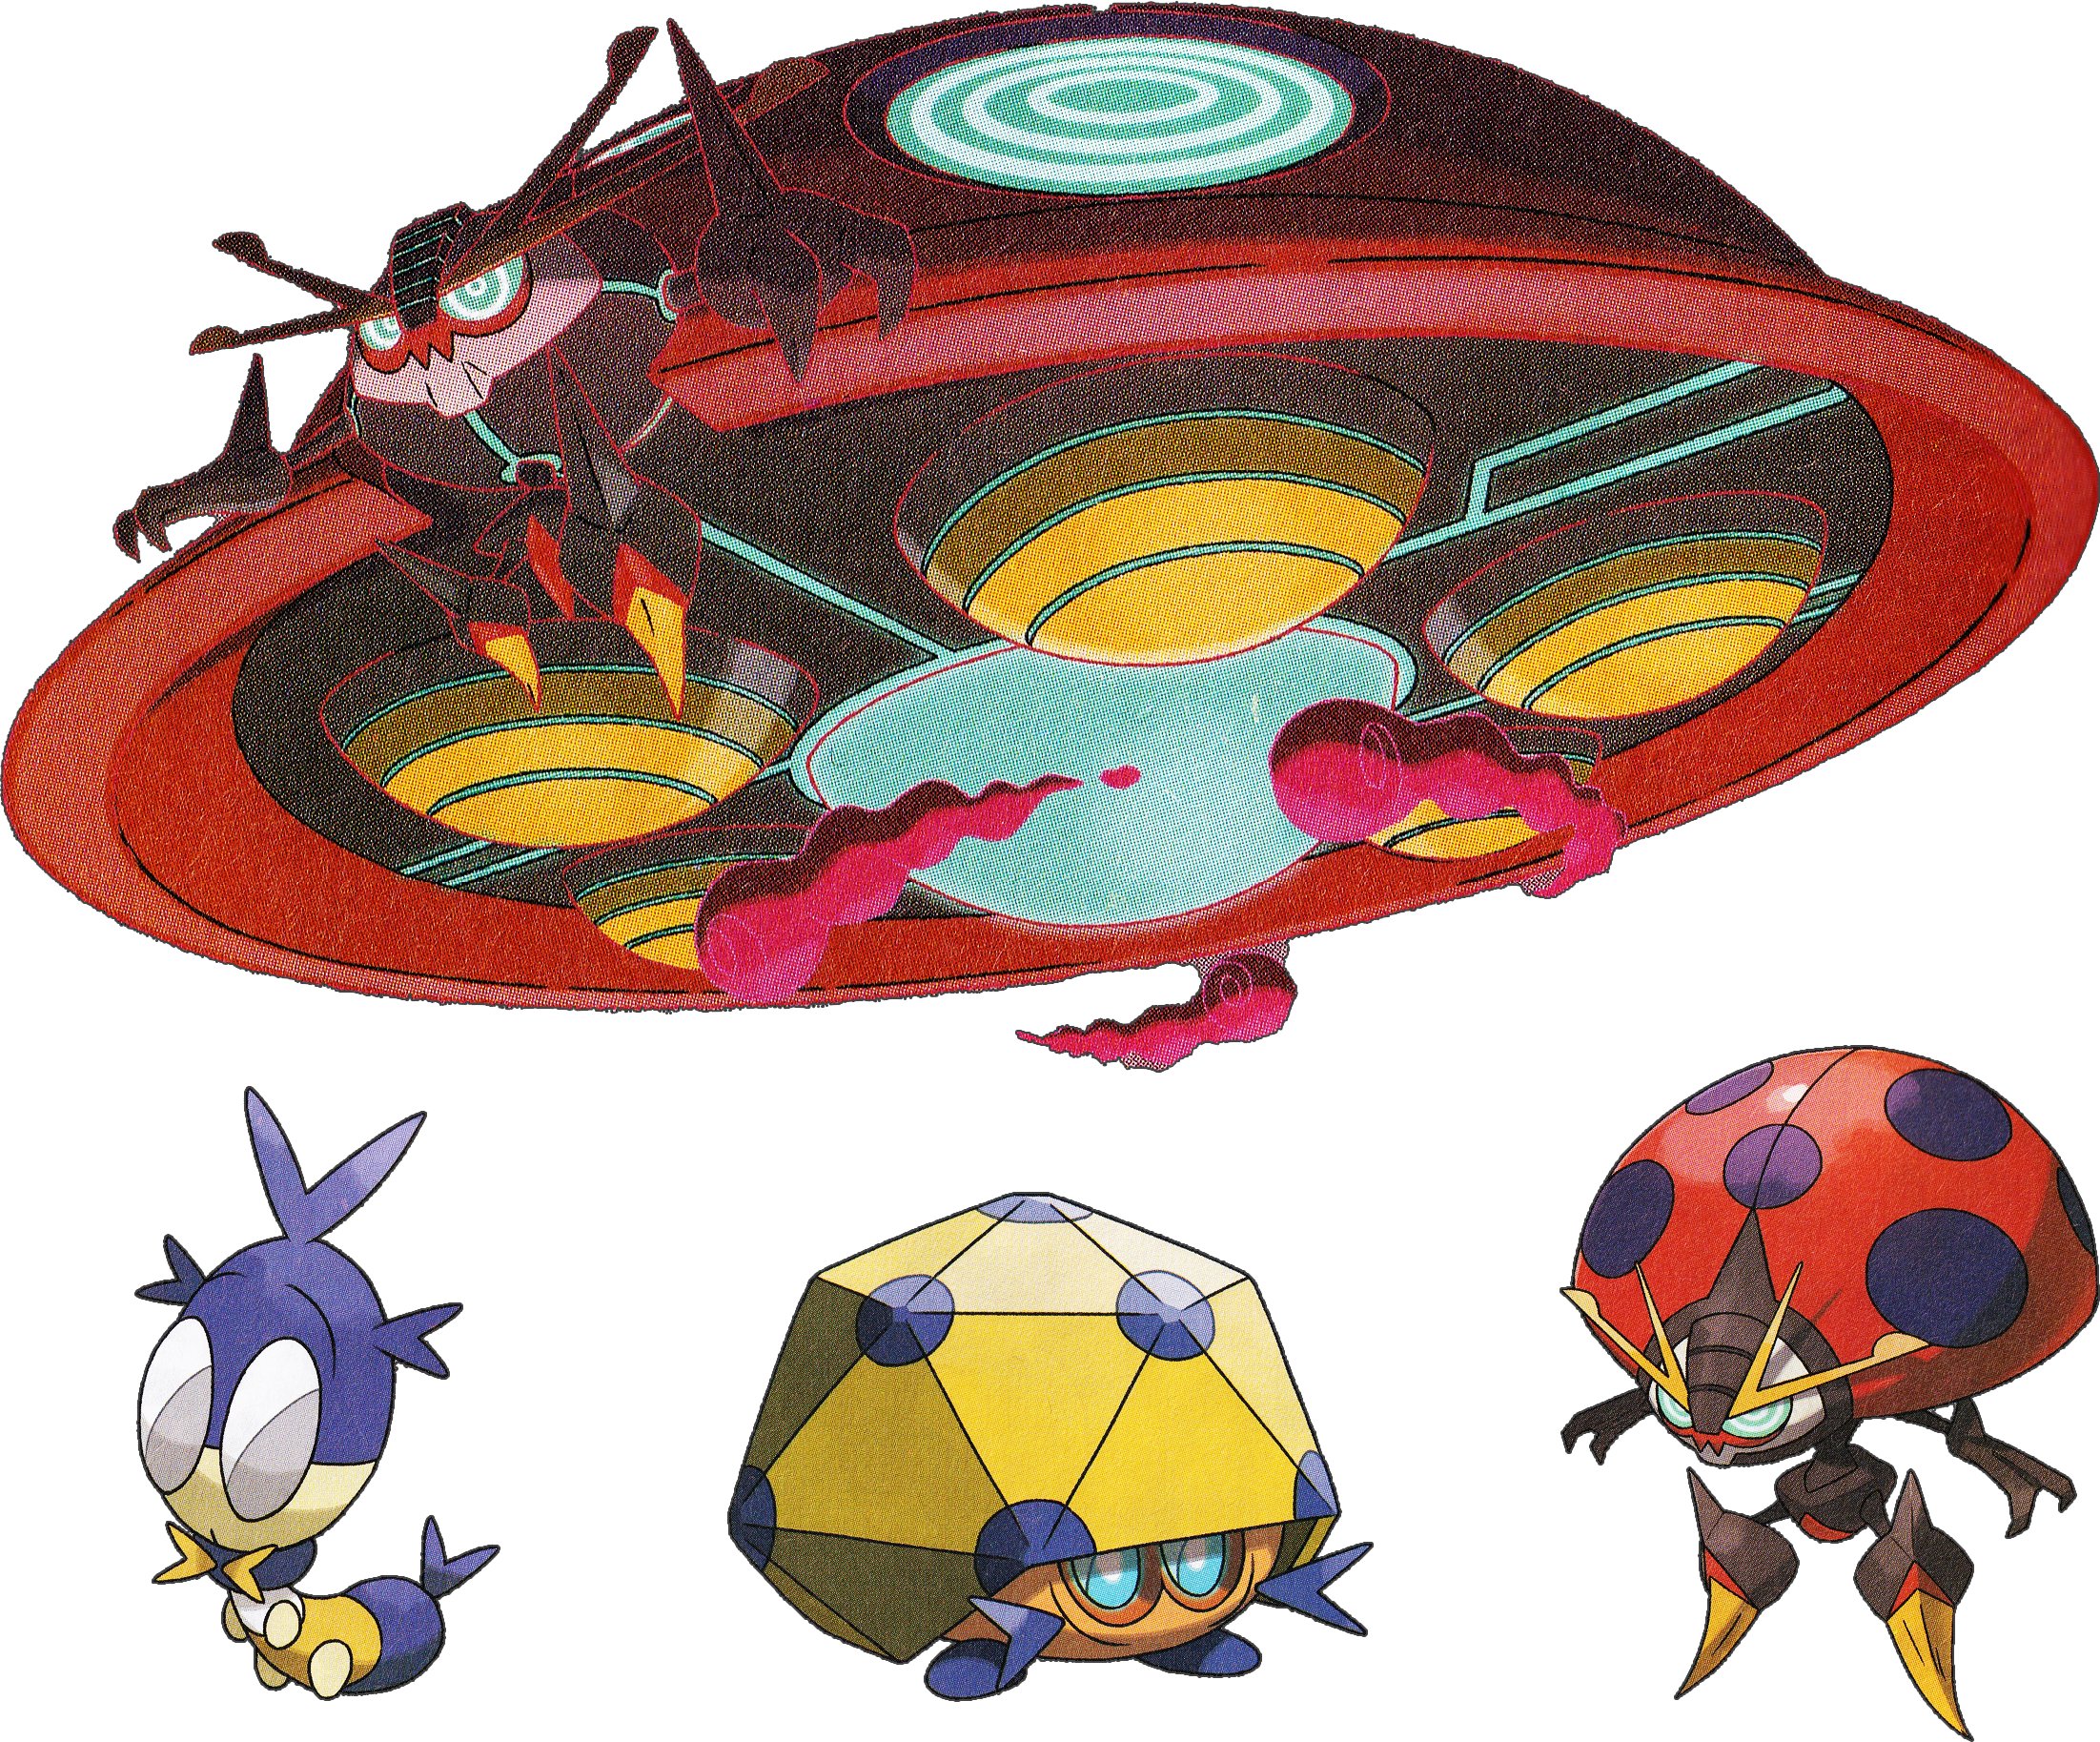 Blipbug line official art. Pokémon Sword and Shield. Know